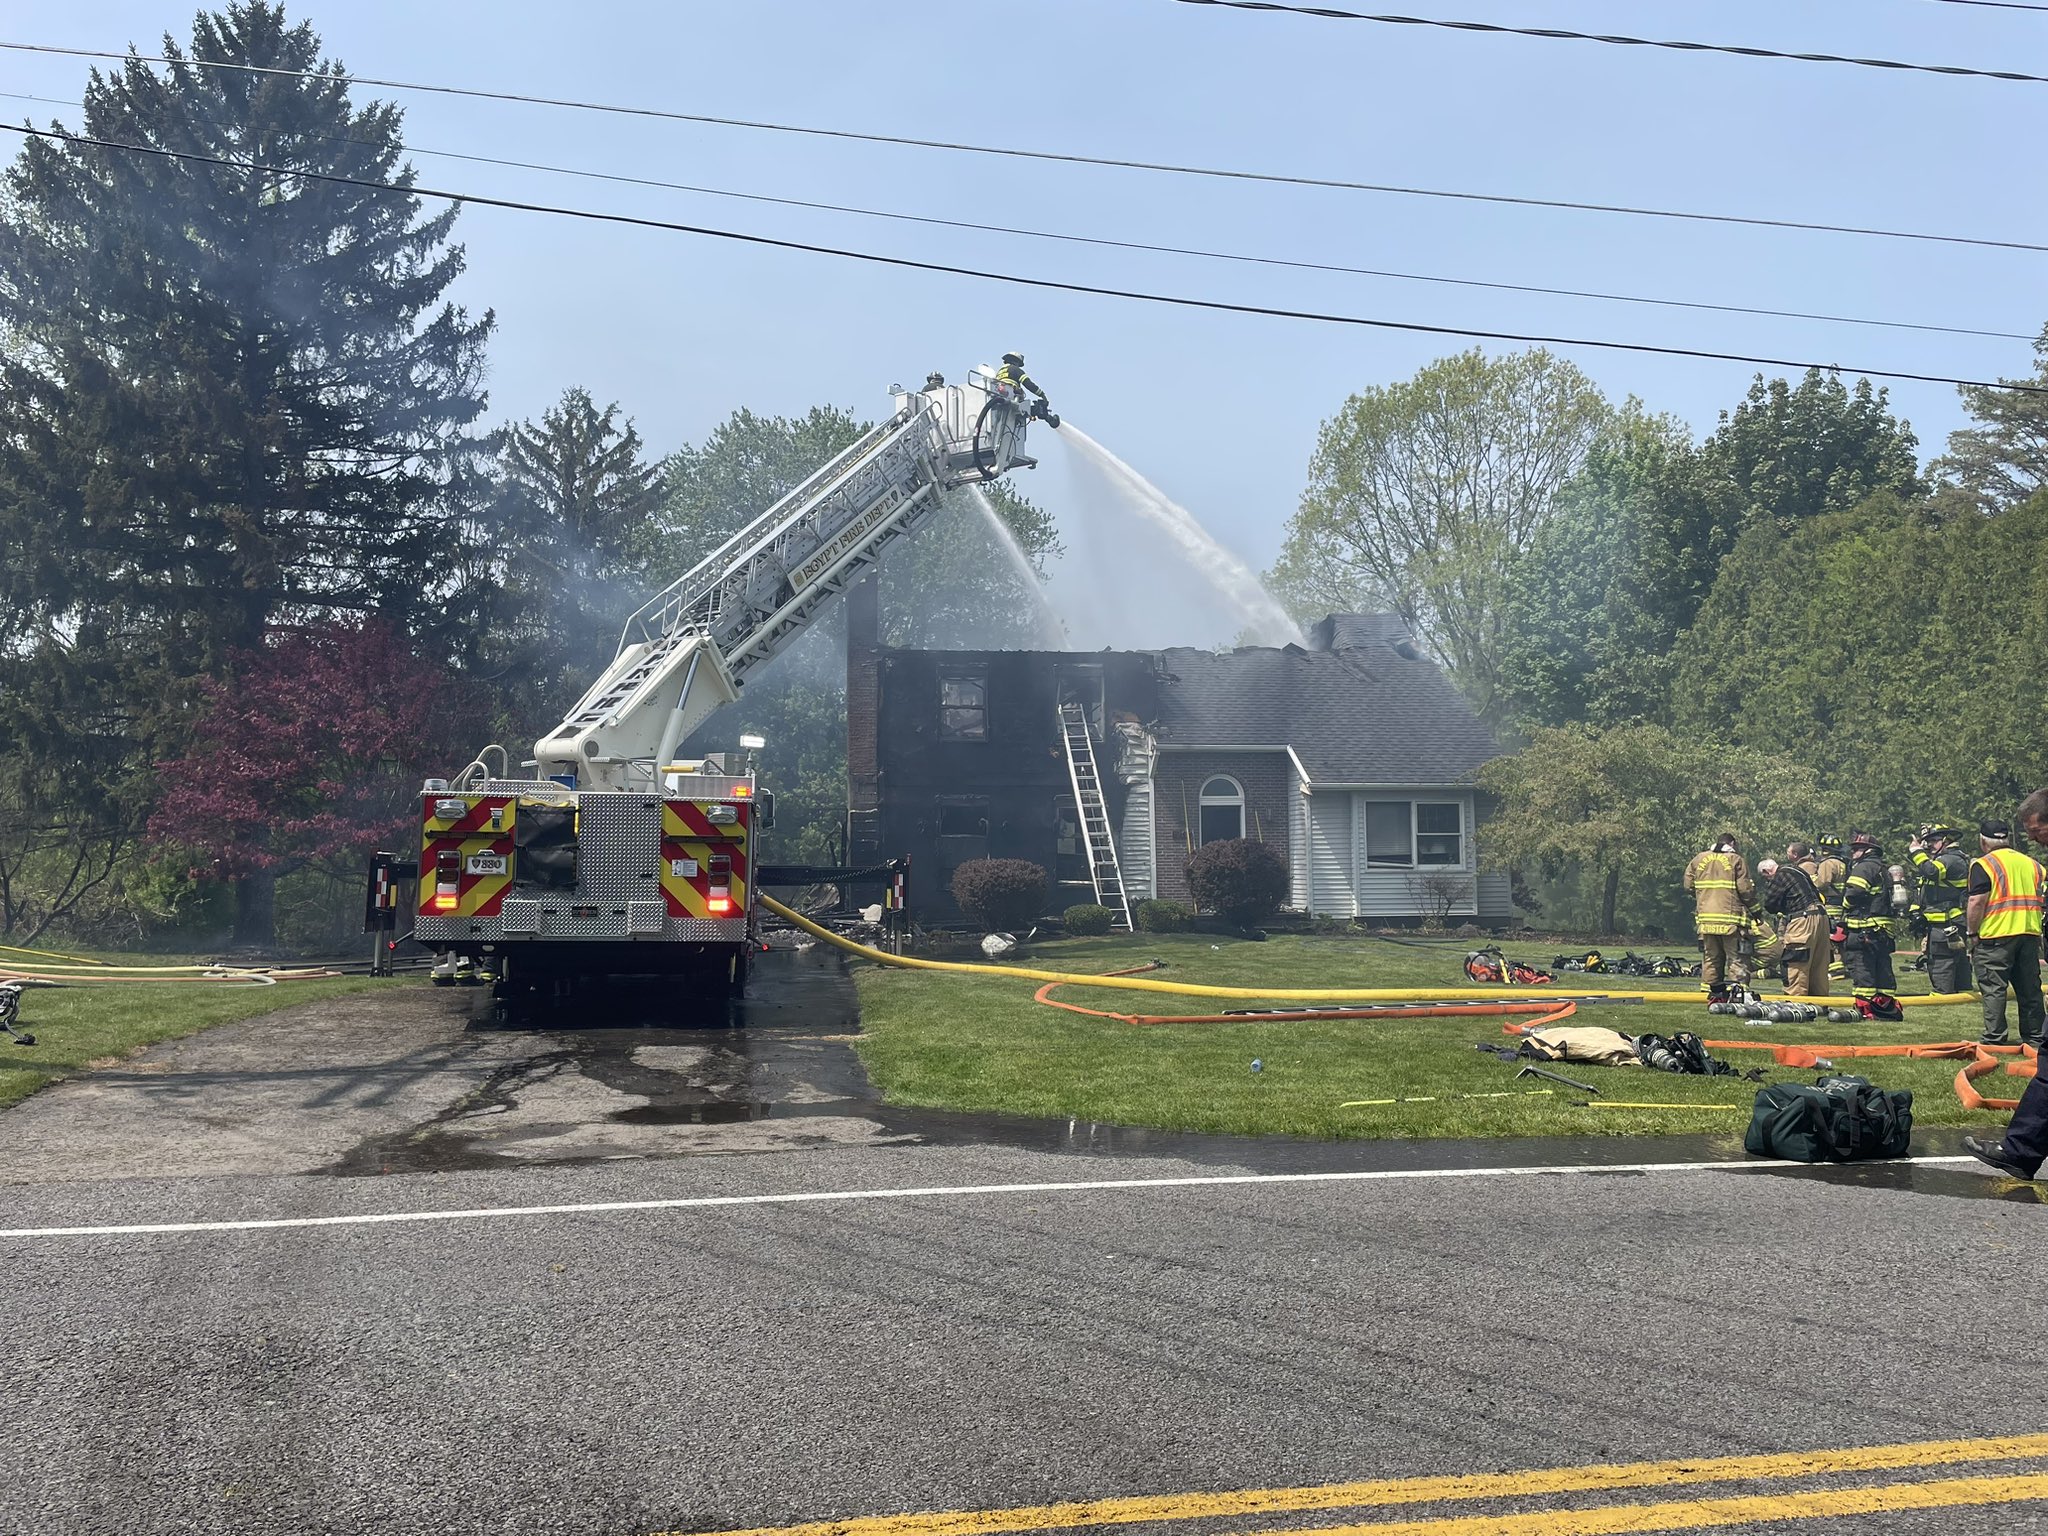 Structure fire in Macedon: Firefighters on-scene during afternoon